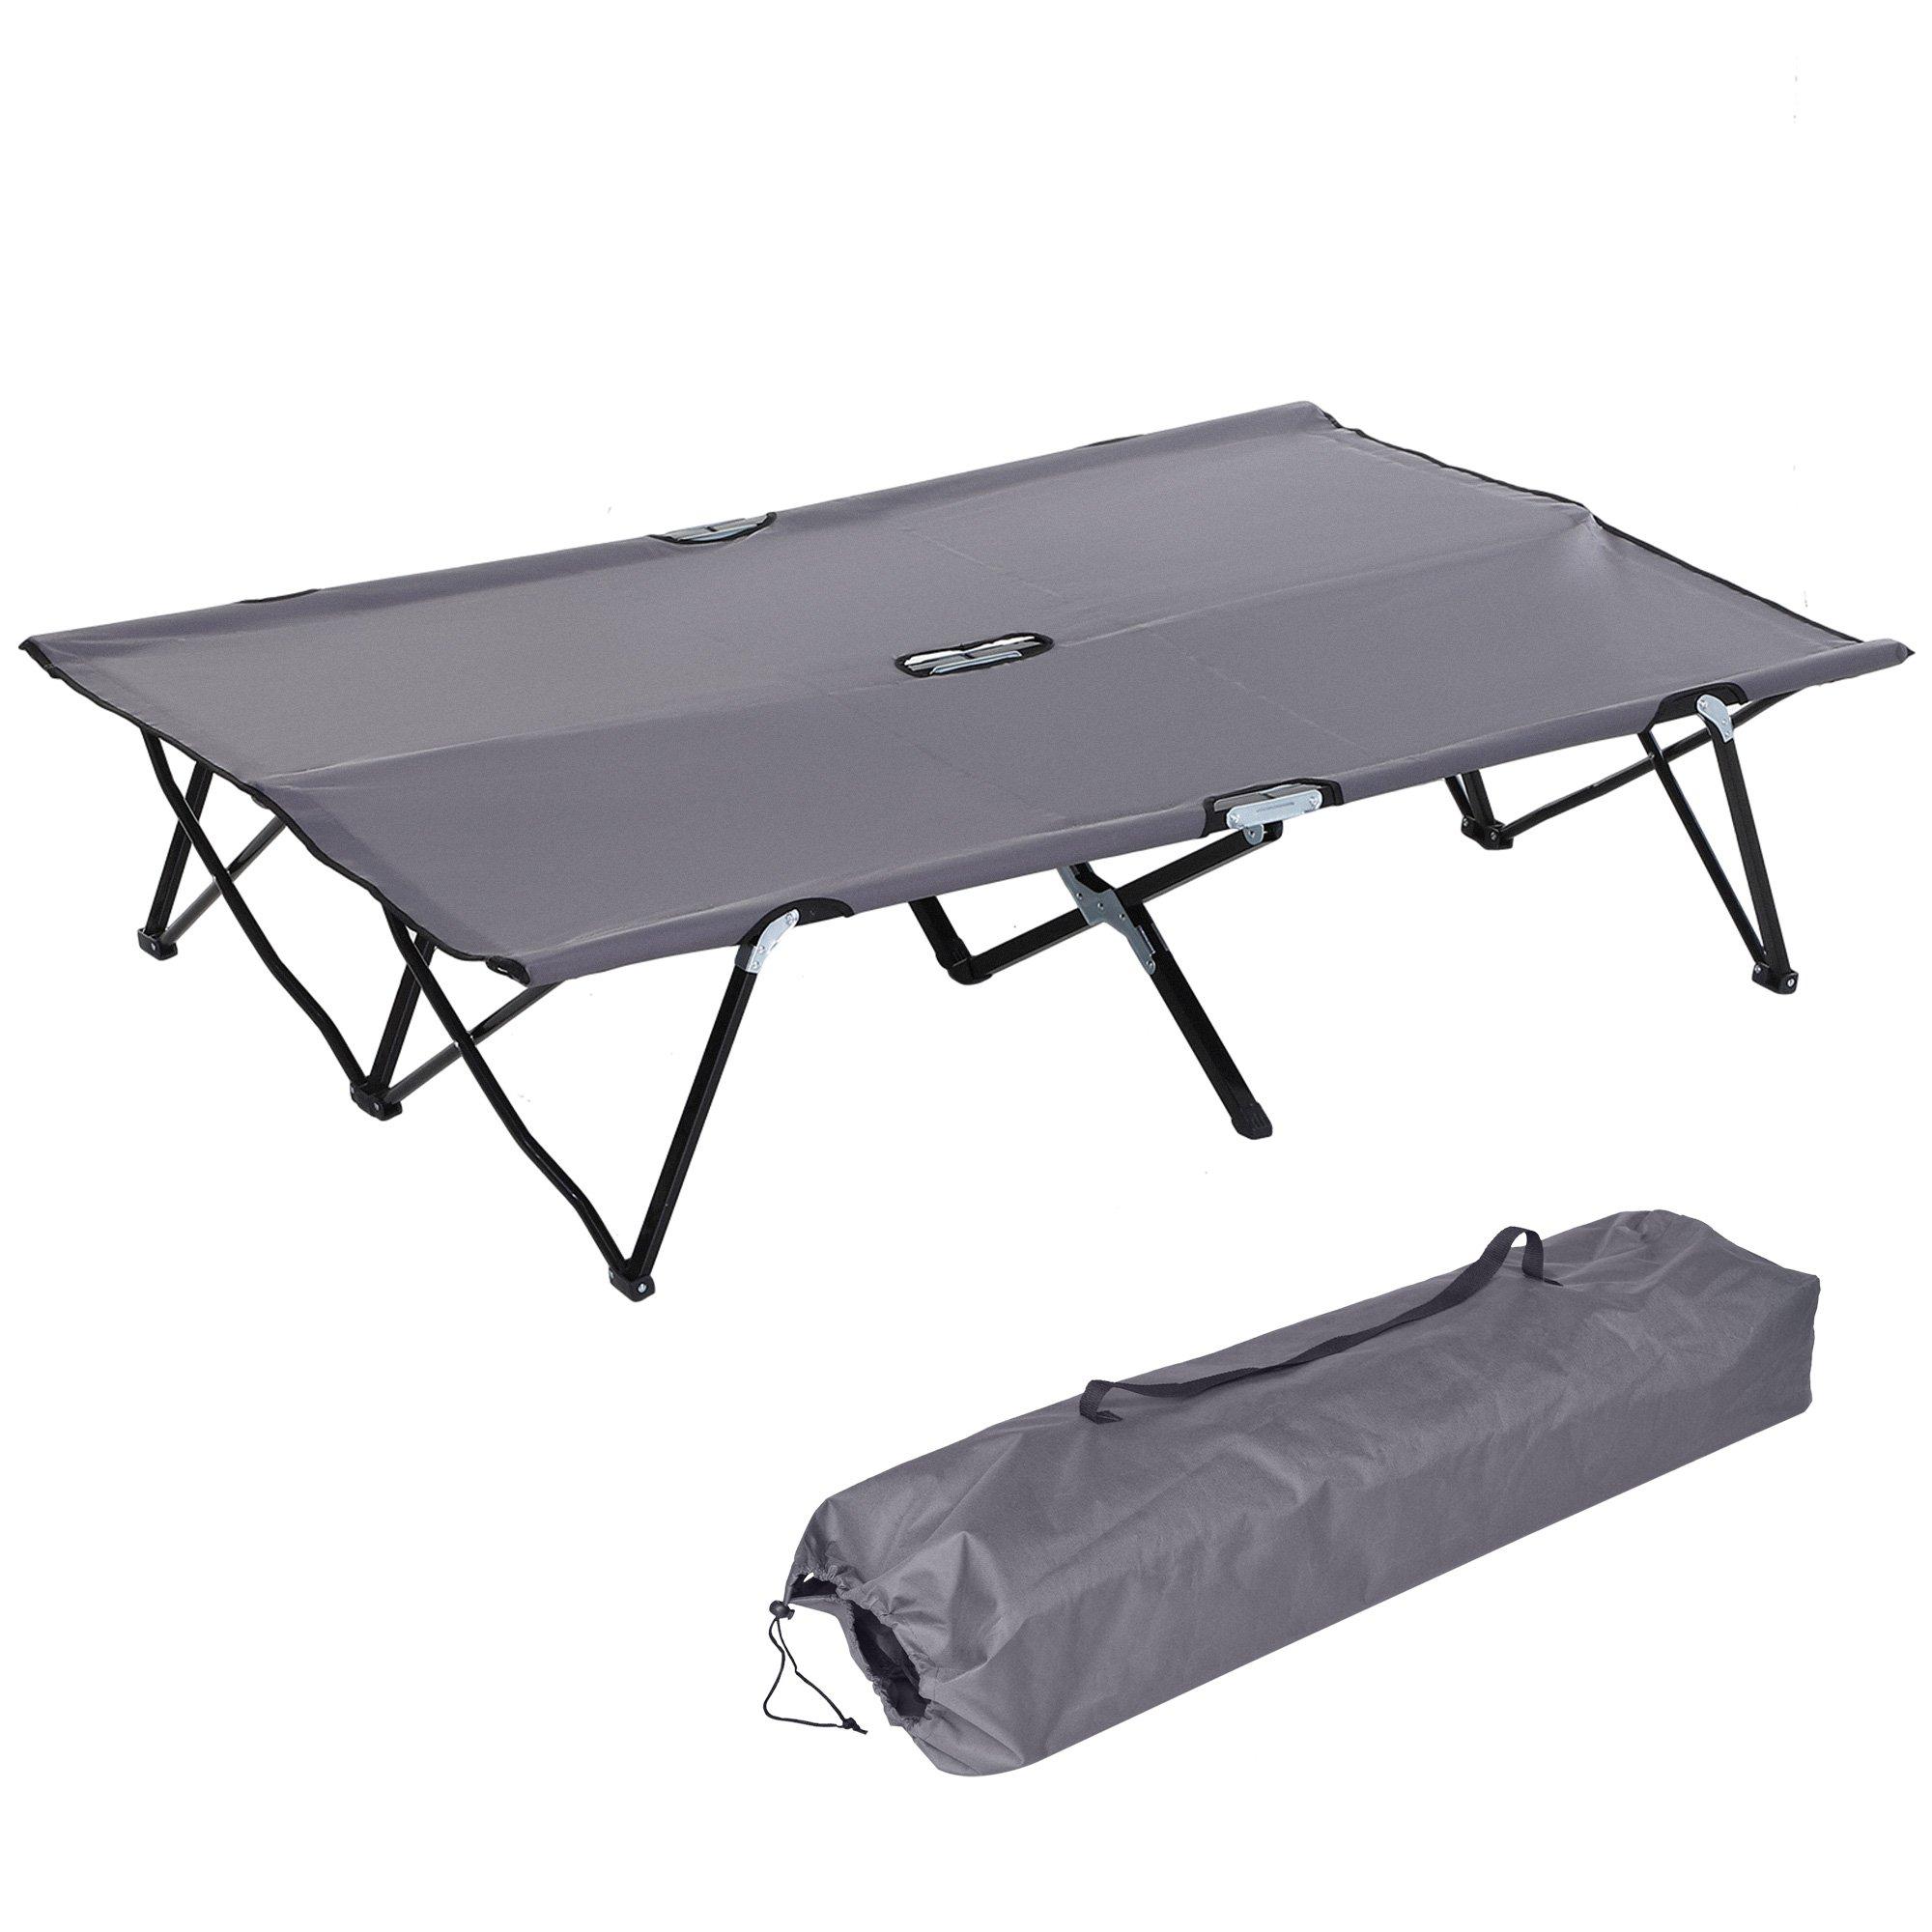 Double Camping Folding Cot Outdoor Portable Sunbed w/ Carry Bag